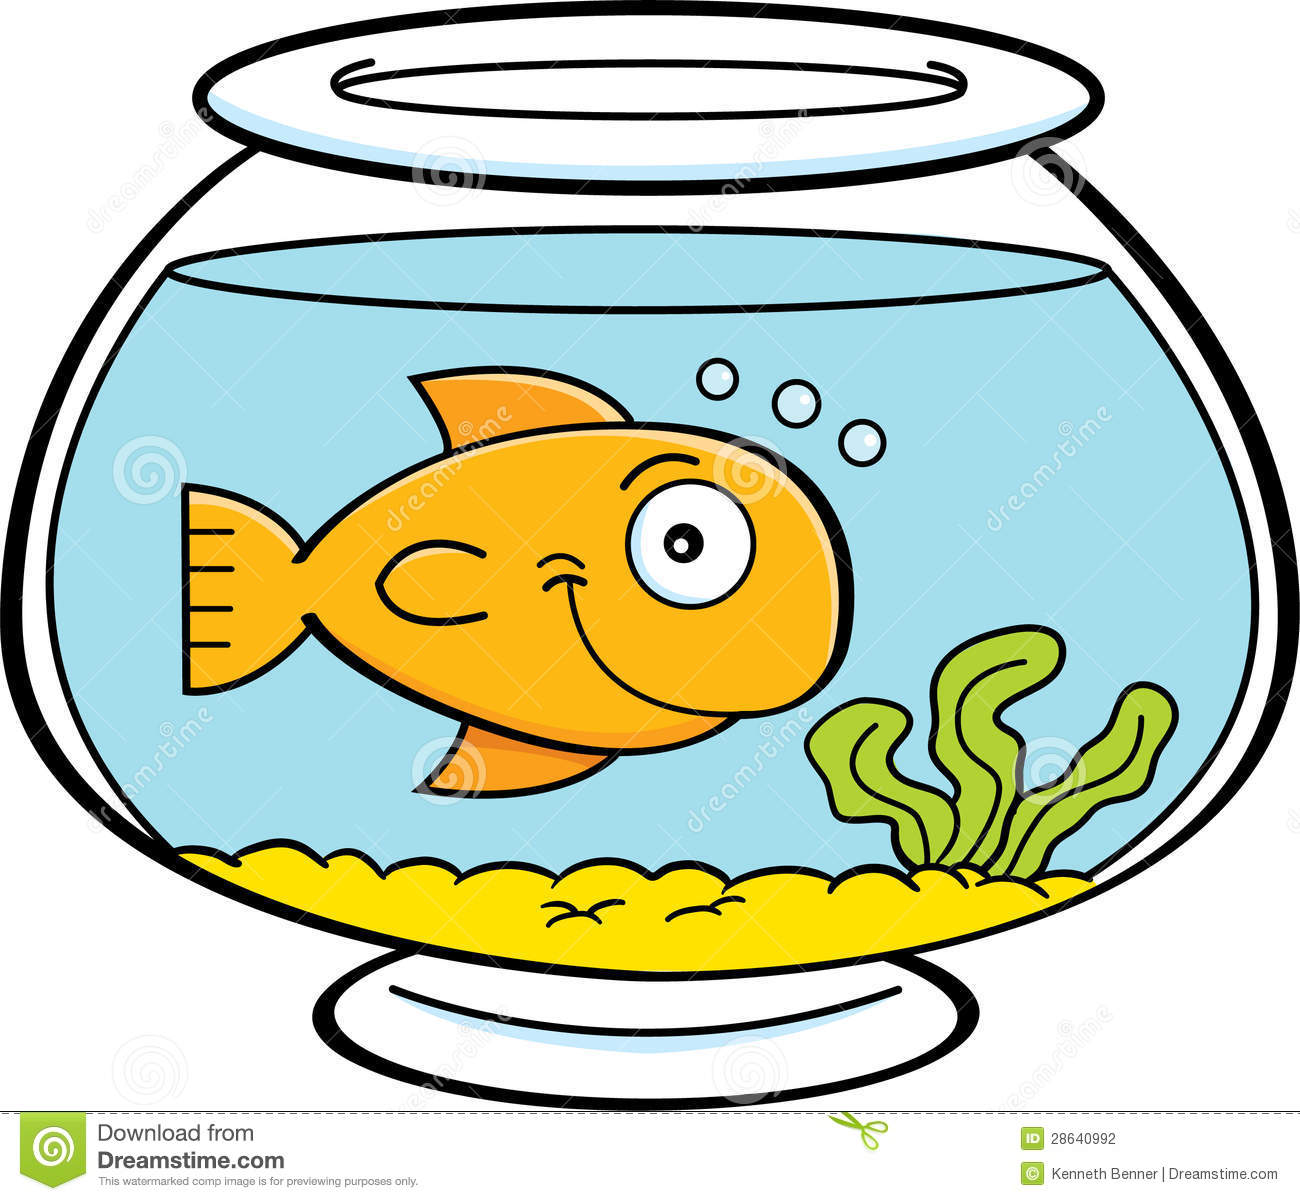 Cartoon Fish In A Fish Bowl Stock Photography   Image  28640992